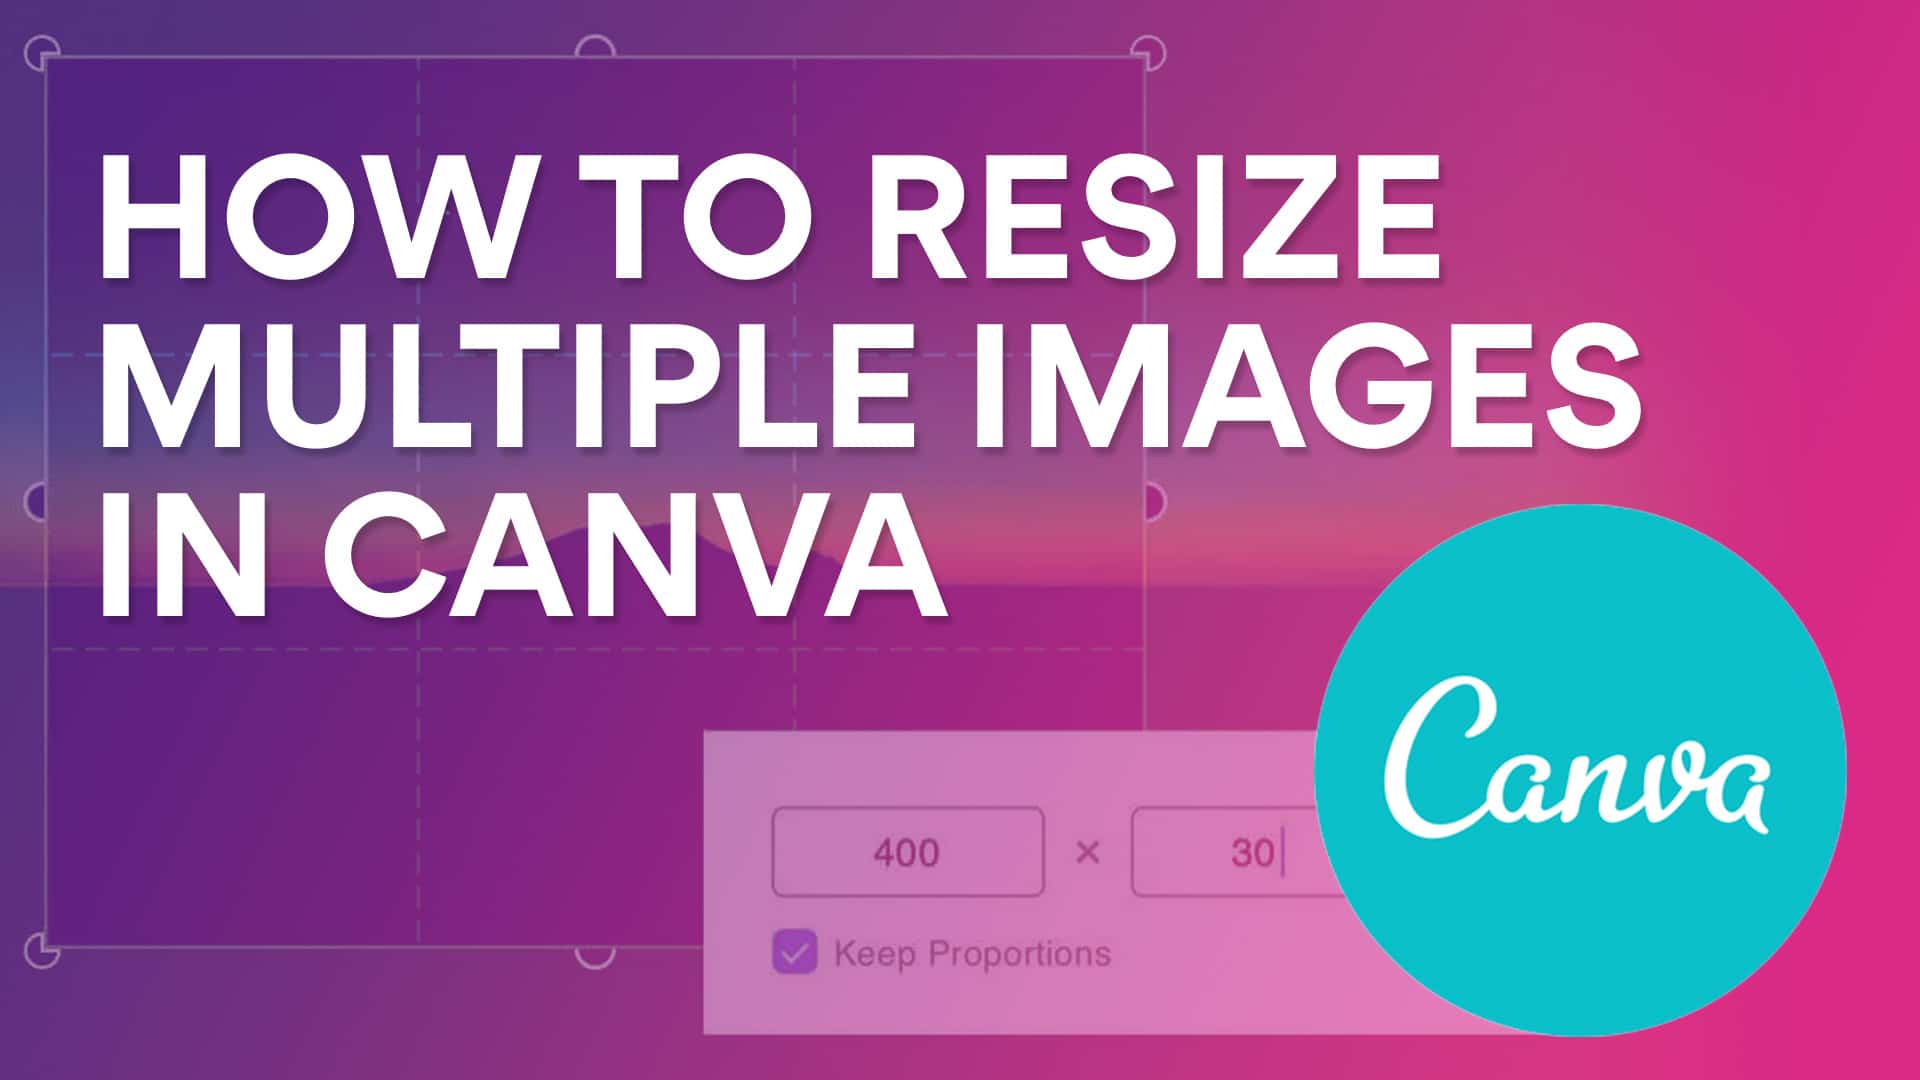 how-to-resize-multiple-images-in-canva-michelle-the-creator